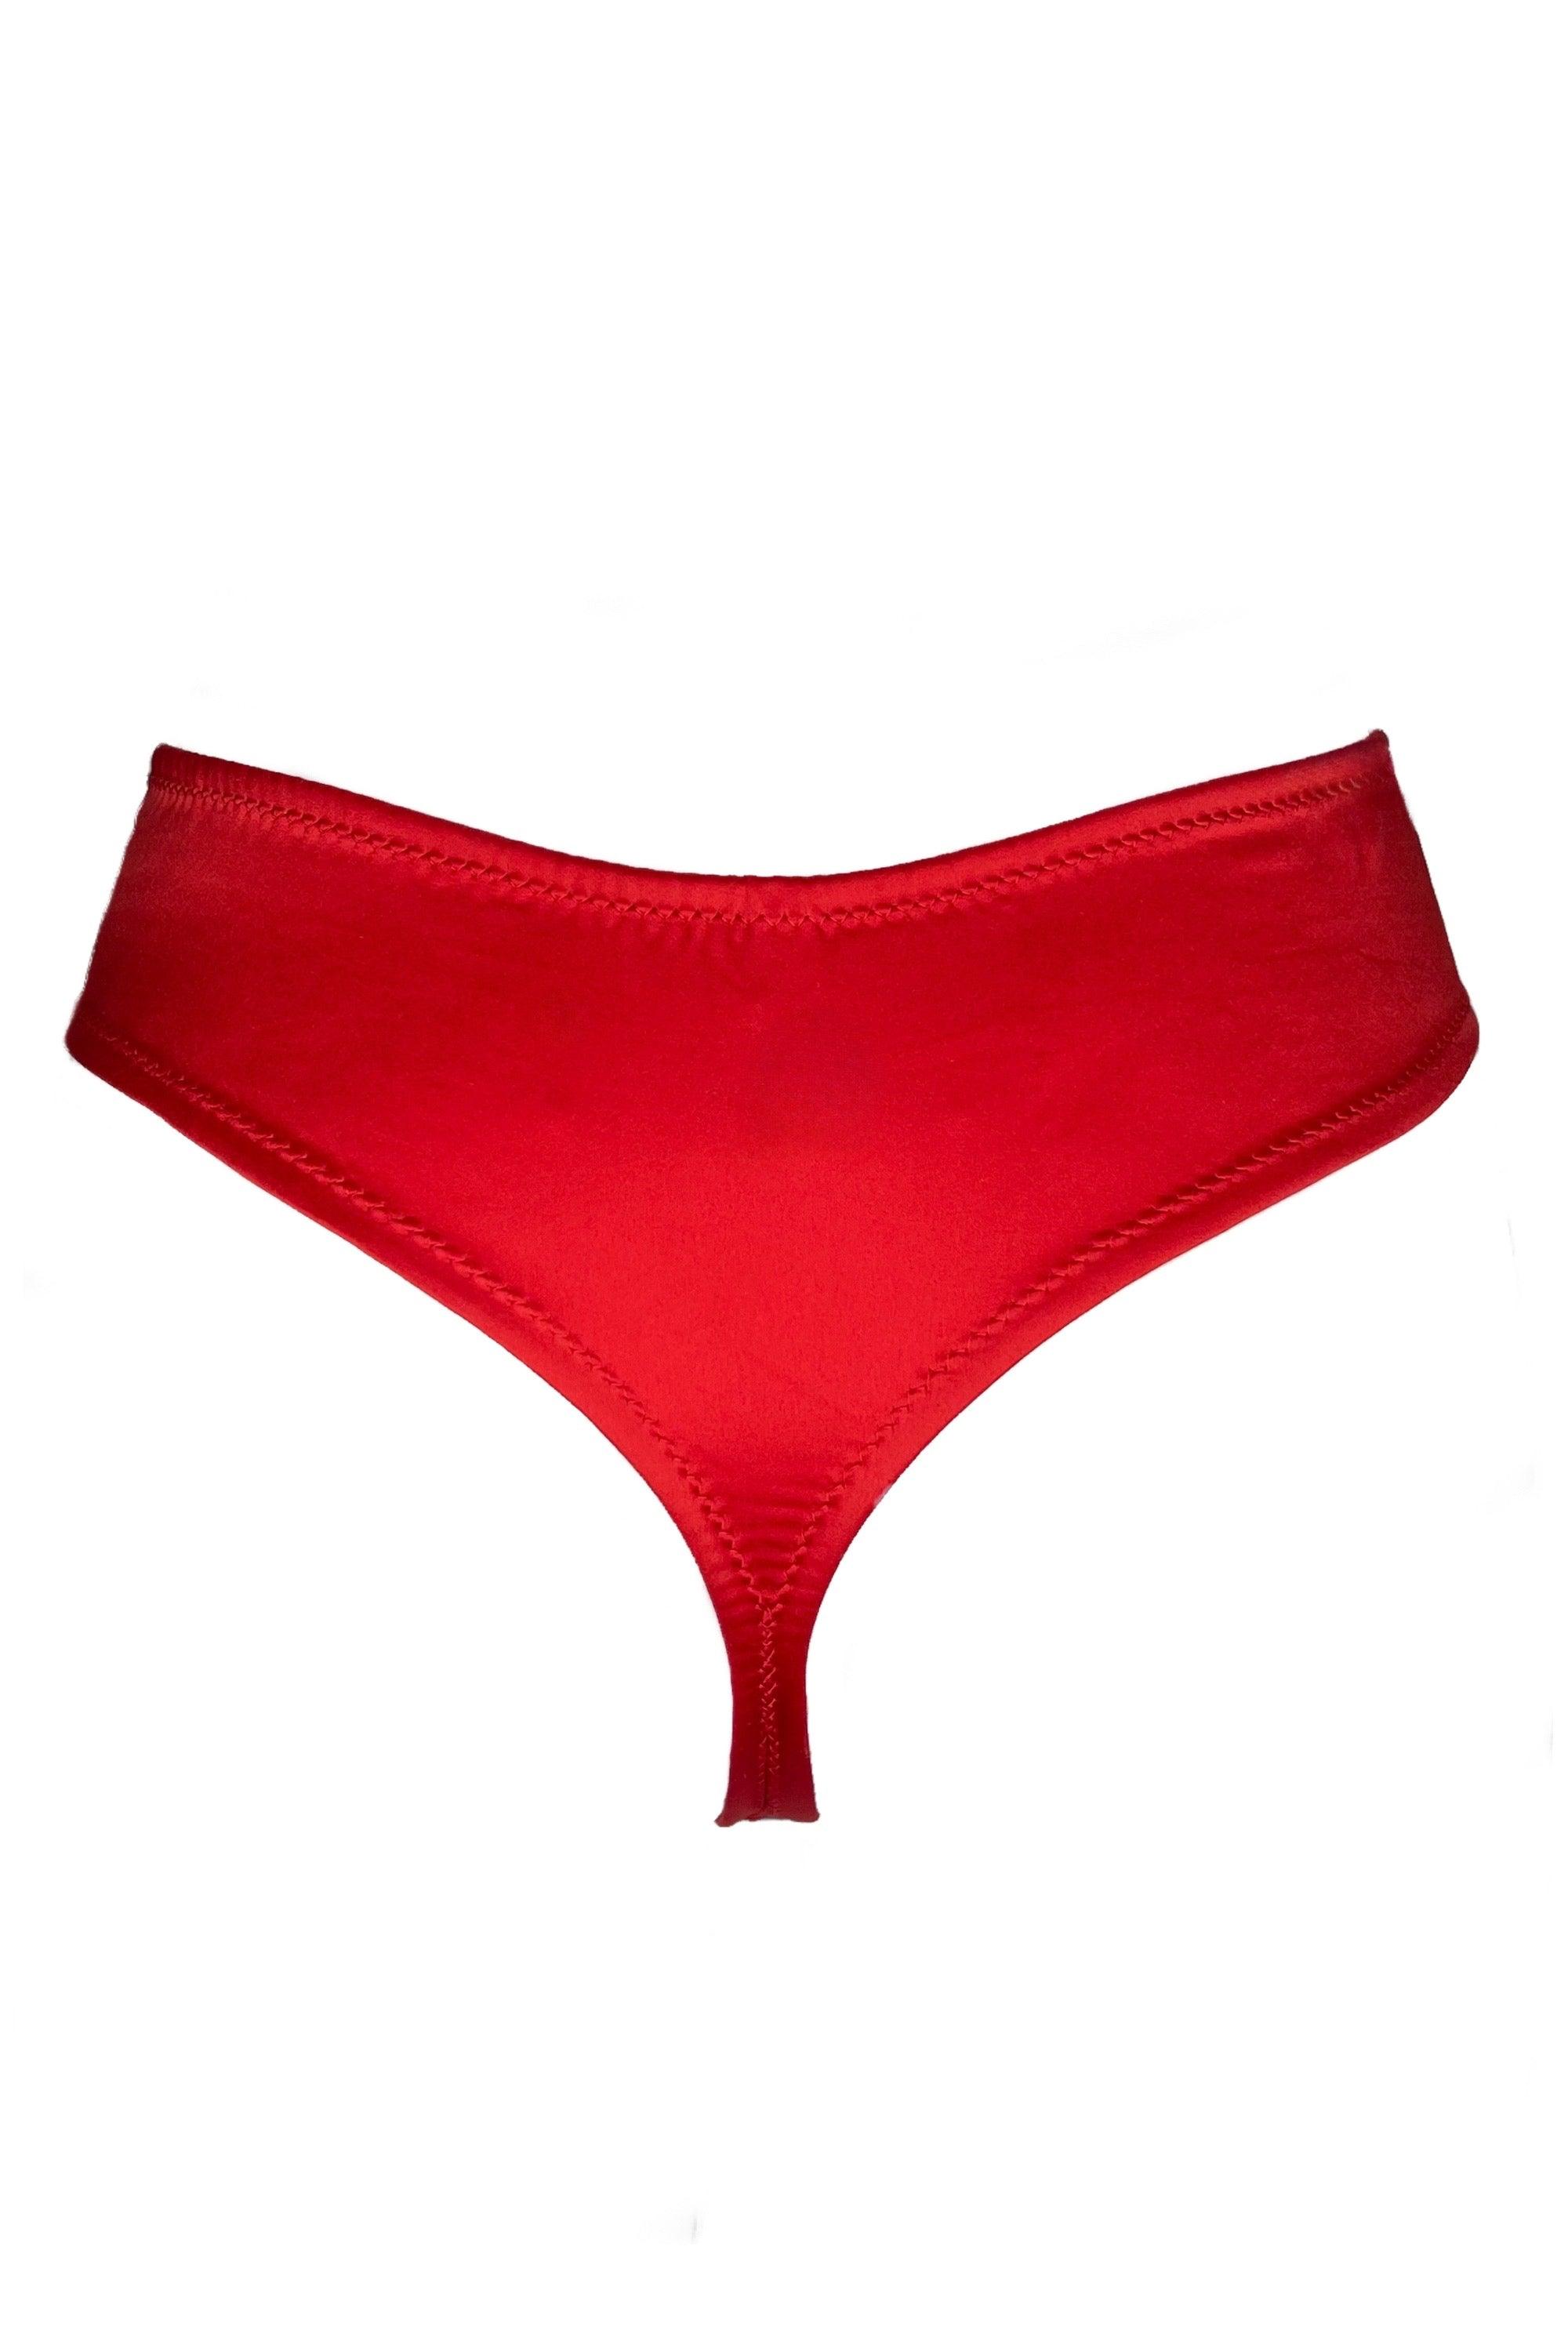 Genevieve Red high-waisted thongs - yesUndress